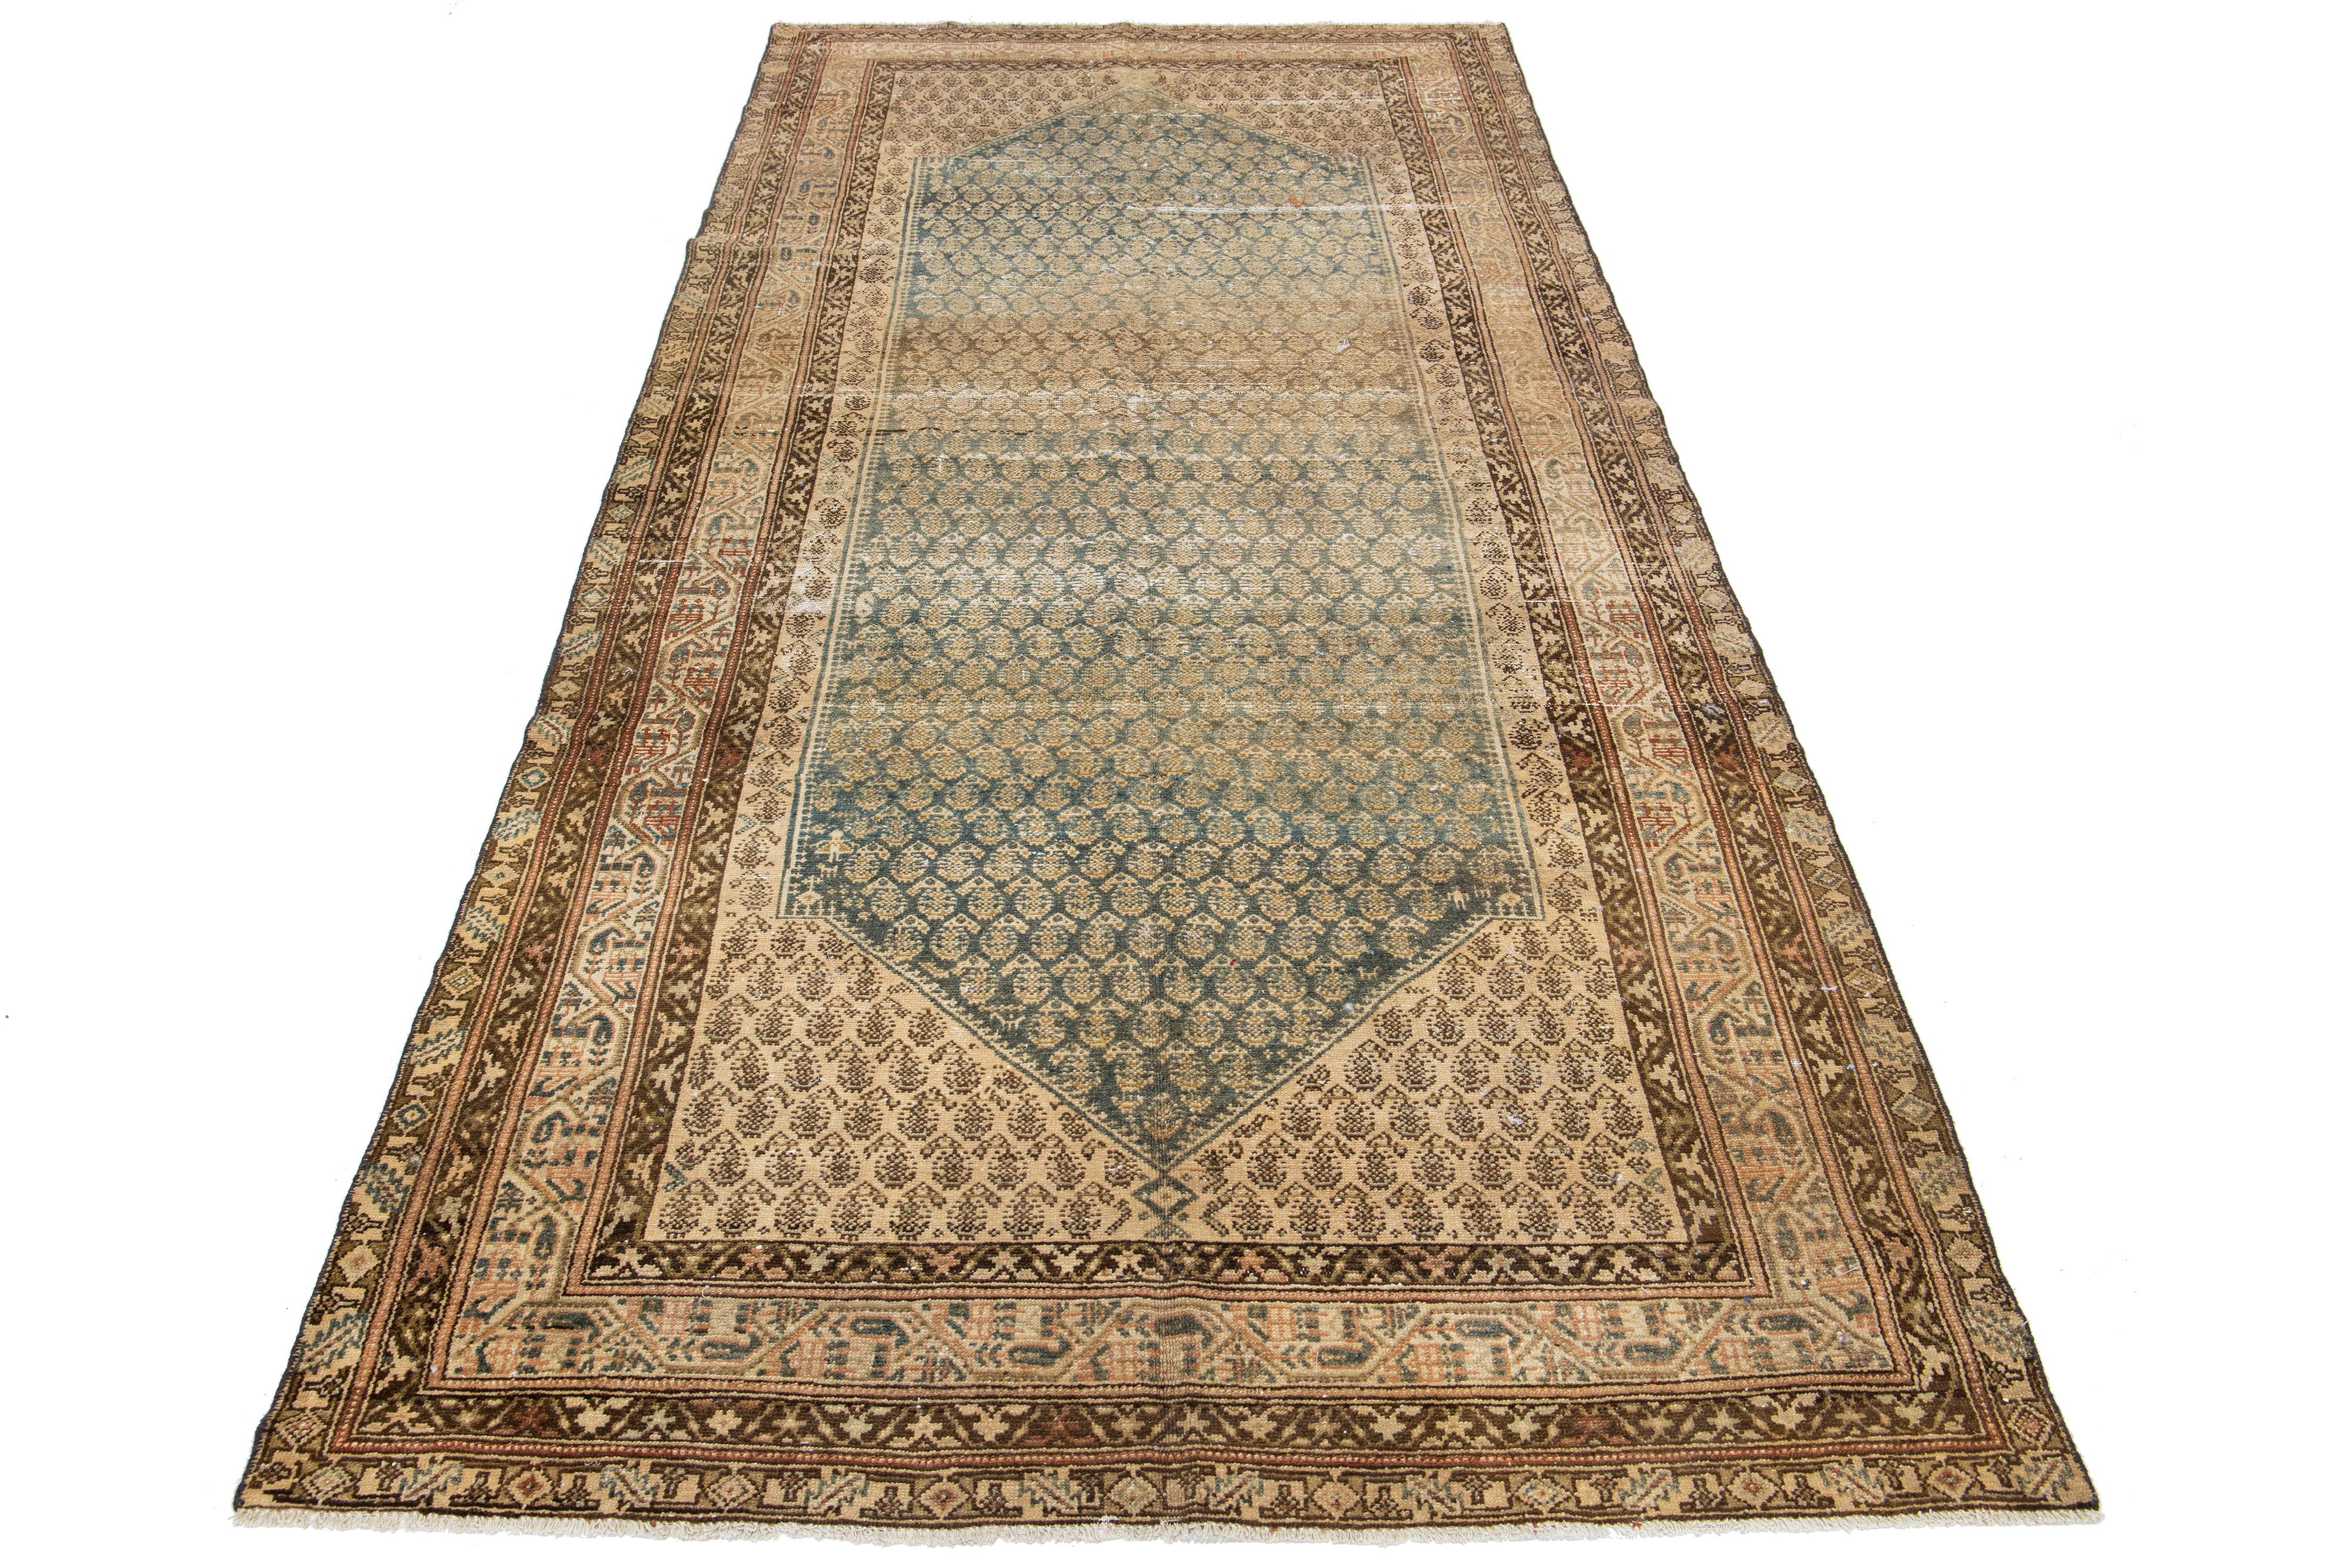 Beautiful antique Malayer hand-knotted wool rug featuring a blue color field. This Persian rug showcases a stunning all-over design with beige and brown accents.

This rug measures 4'11